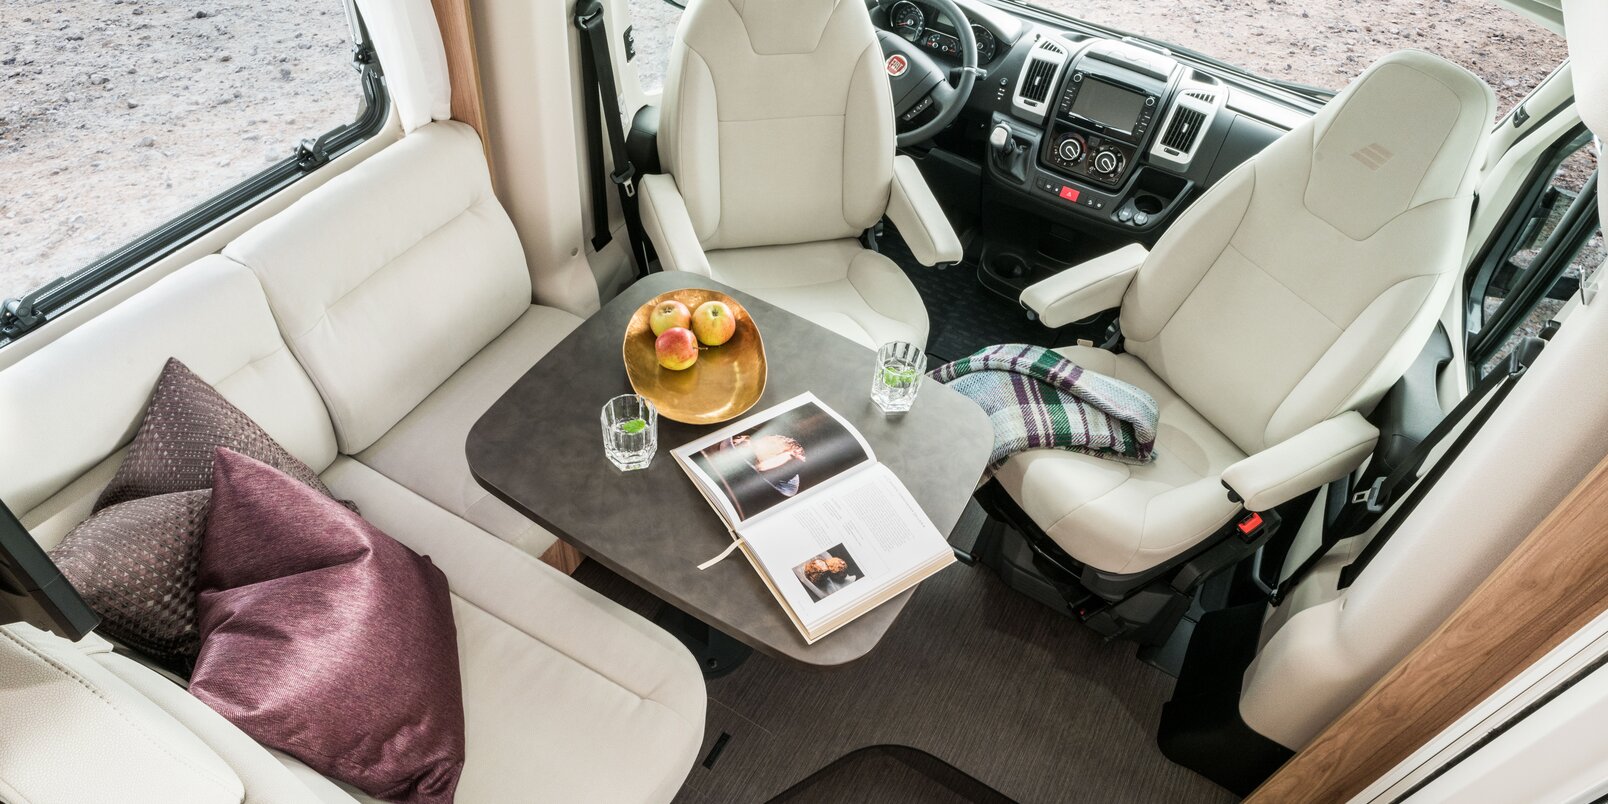 Living area of the semi-integrated HYMER Exsis-t motorhome with driver's seats, set table with fruit bowl, book and glasses